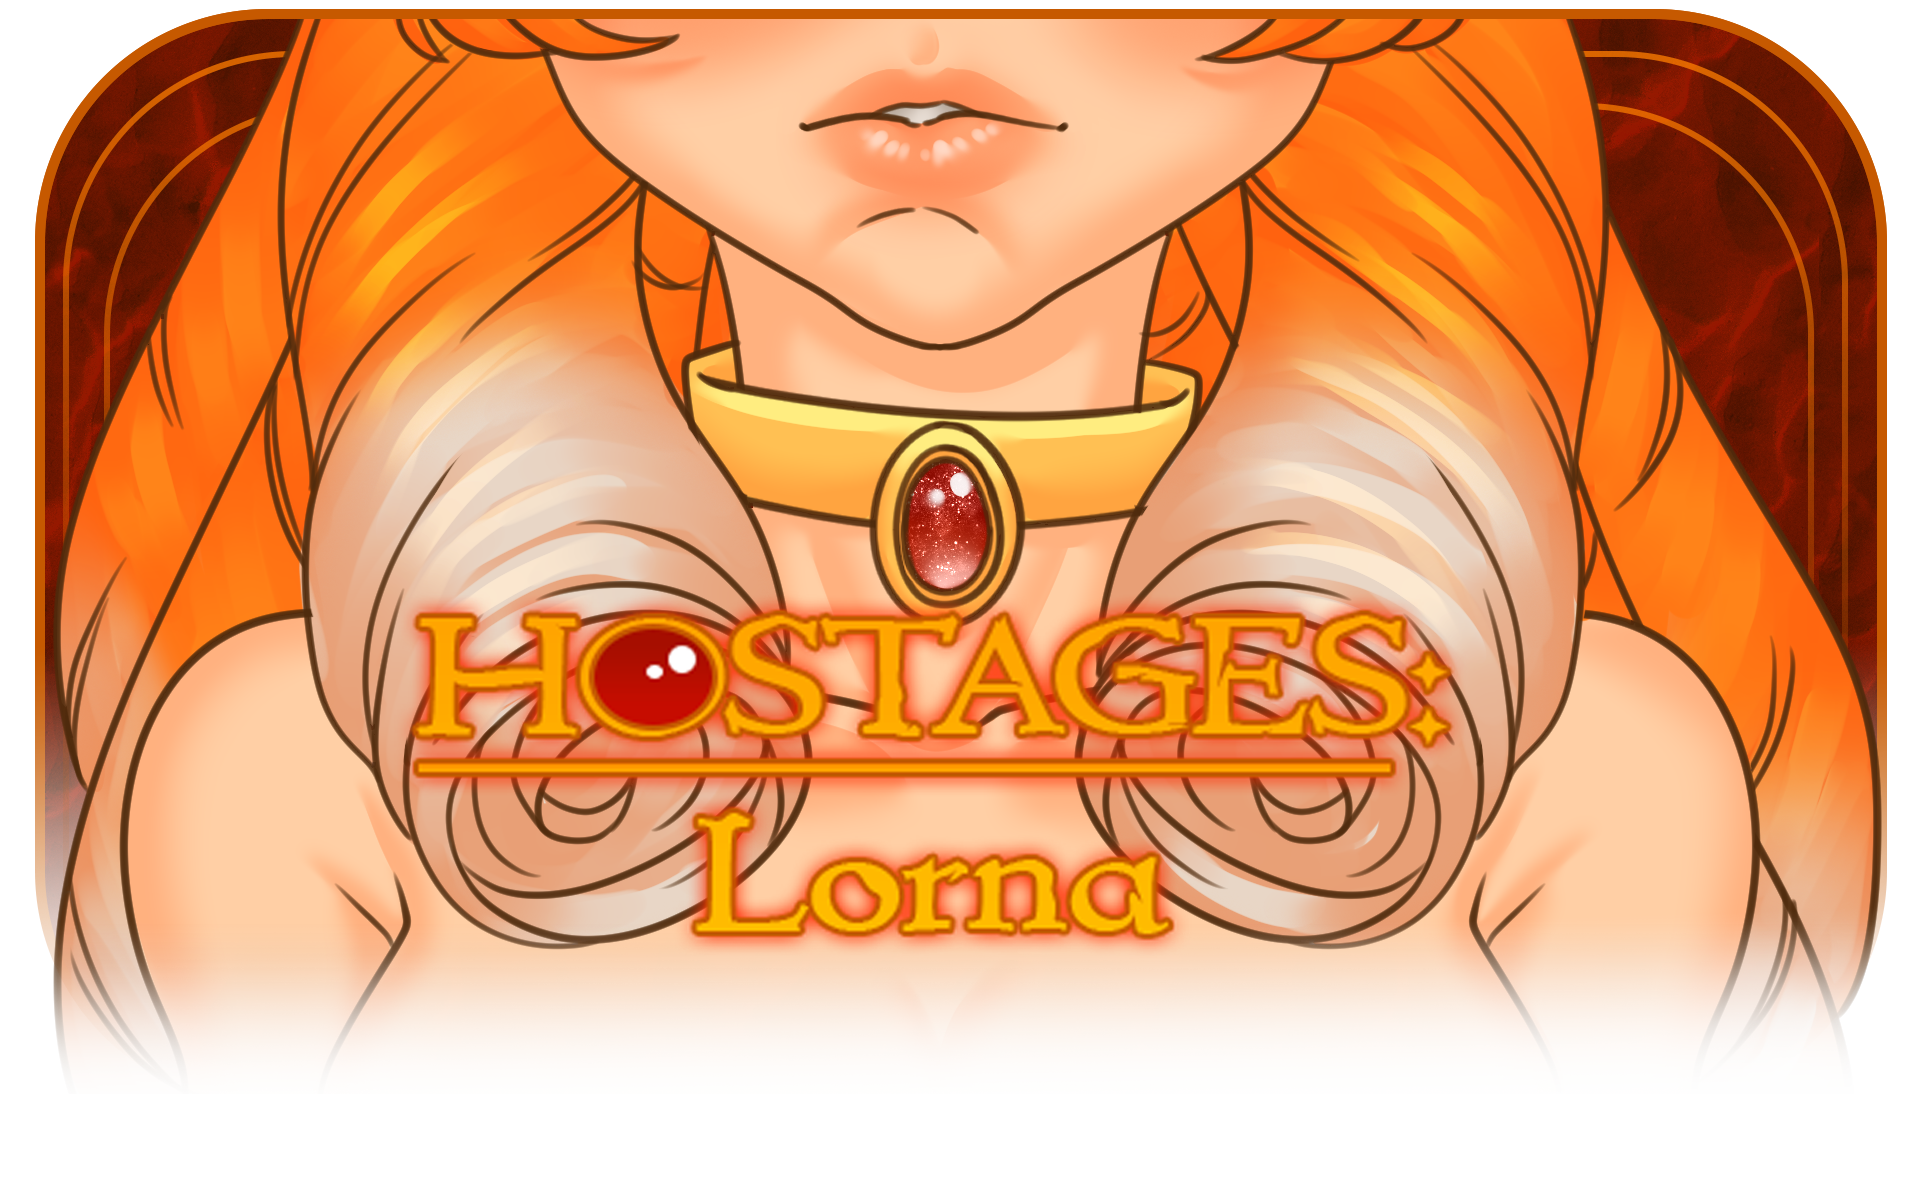 Hostages: Lorna